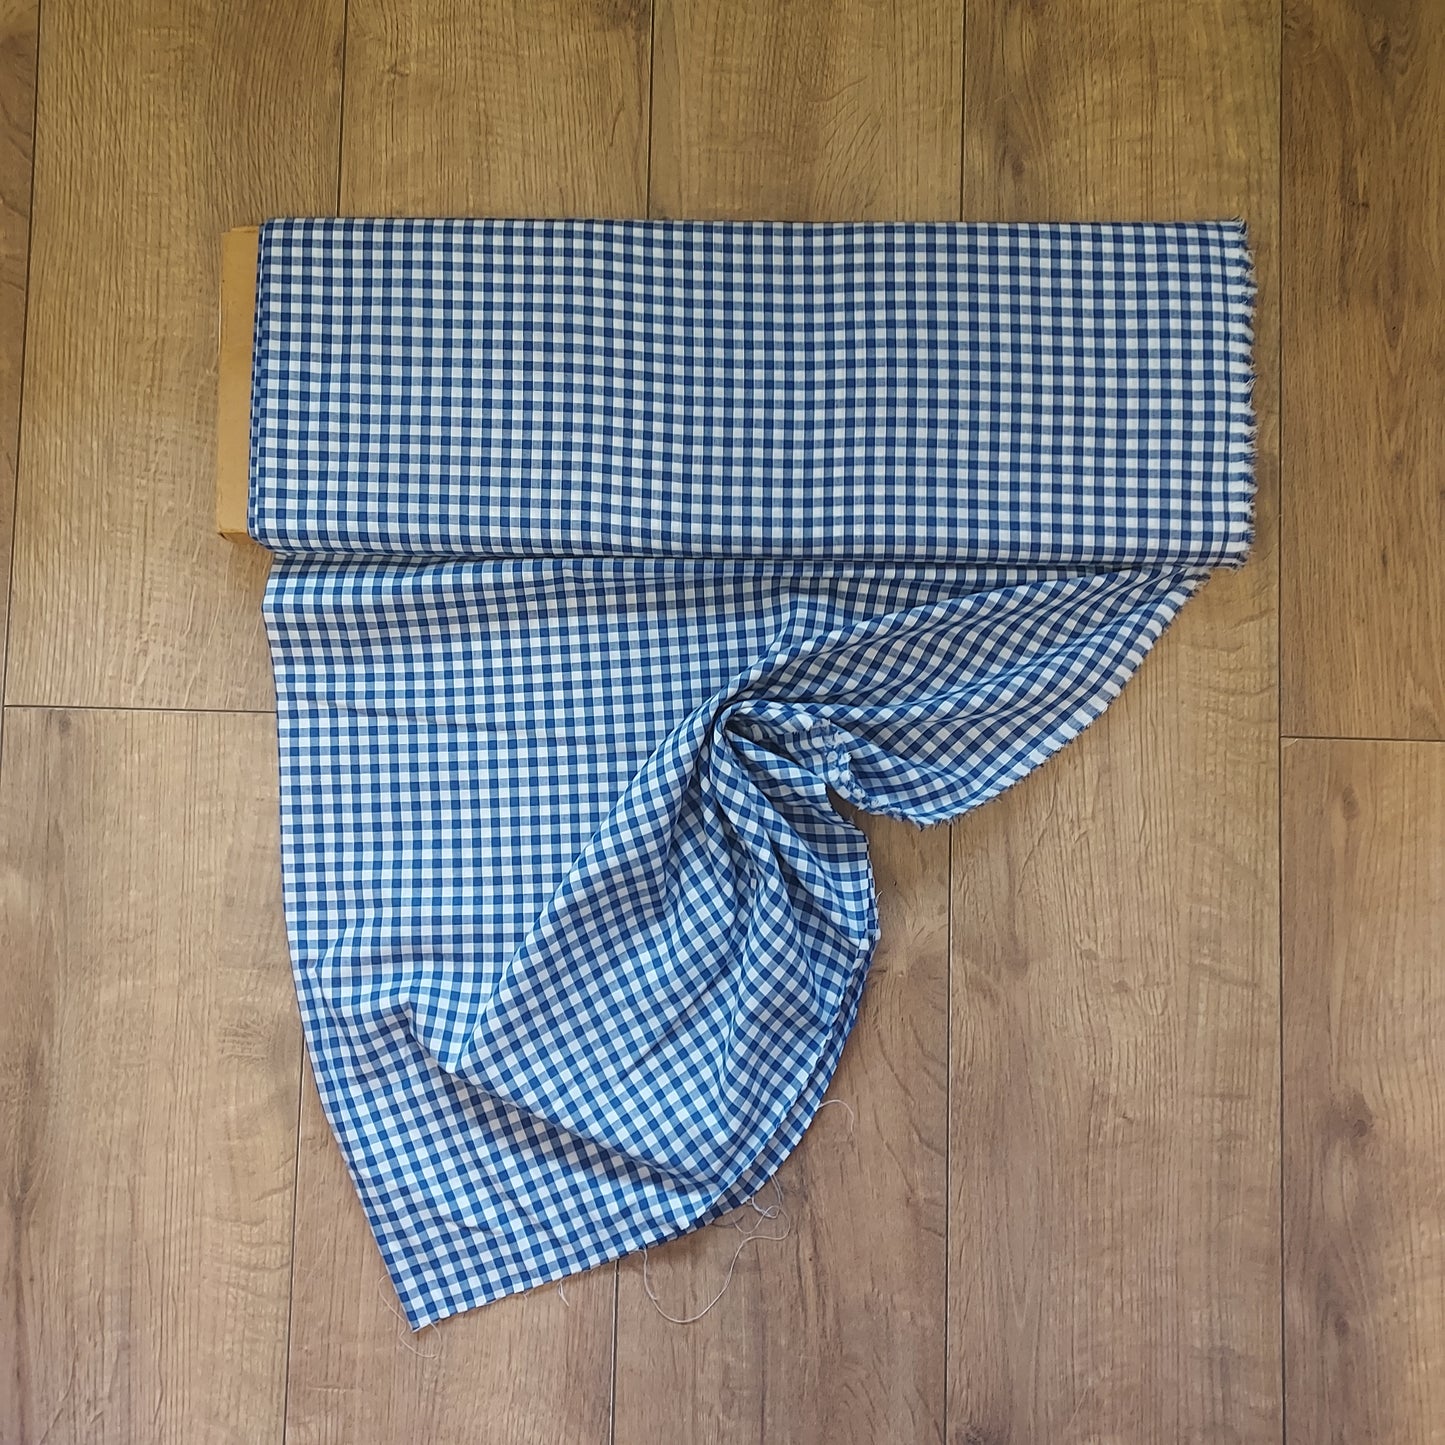 Gingham 1/4in Check Cotton Fabric - Various Shades